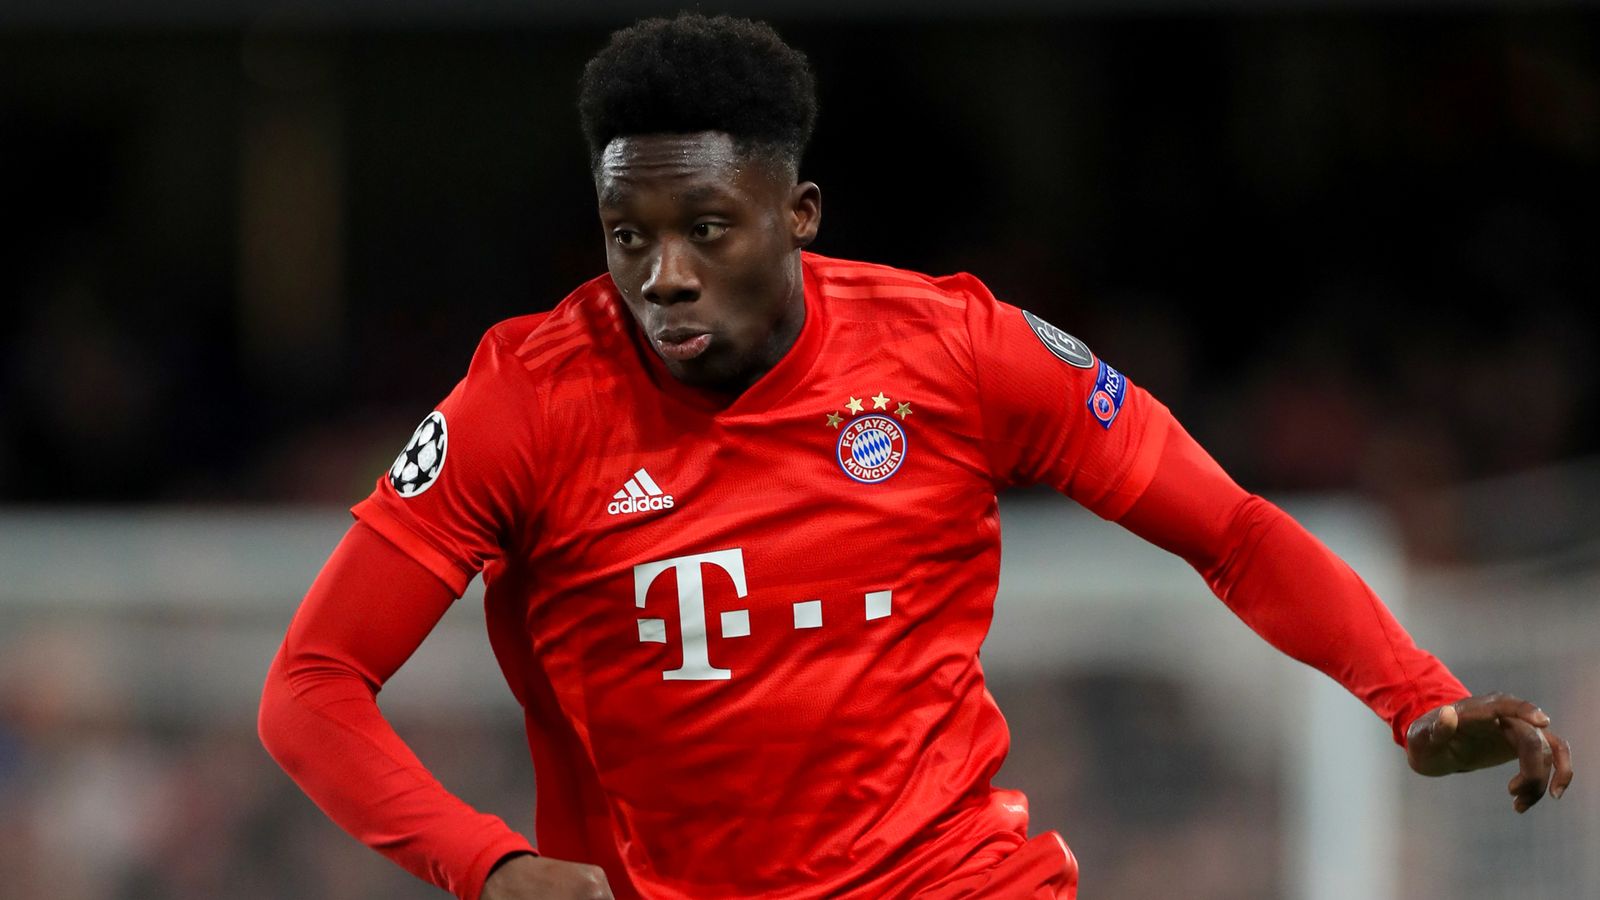 PSG vs Bayern: Alphonso Davies: From a refugee camp to the